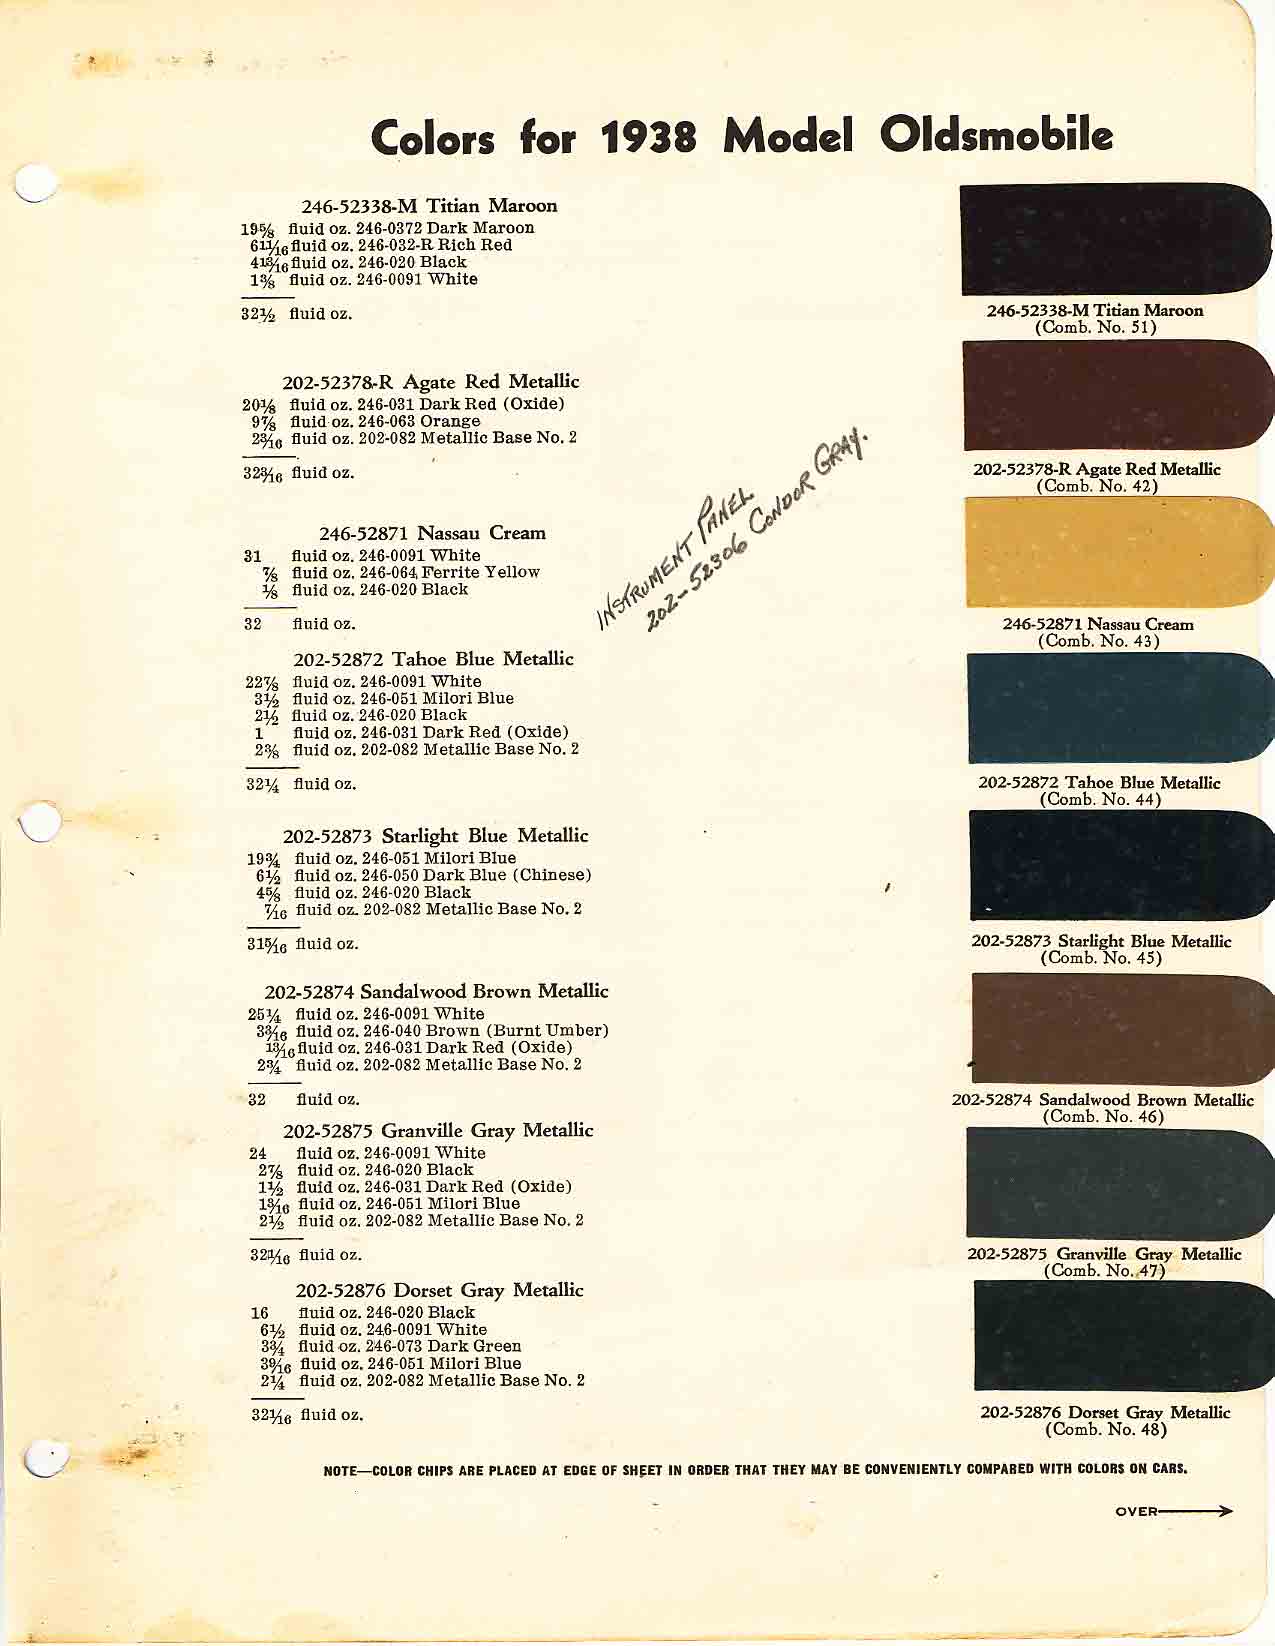 Paint Colors and Paint Codes used on the 1938 Oldsmobile